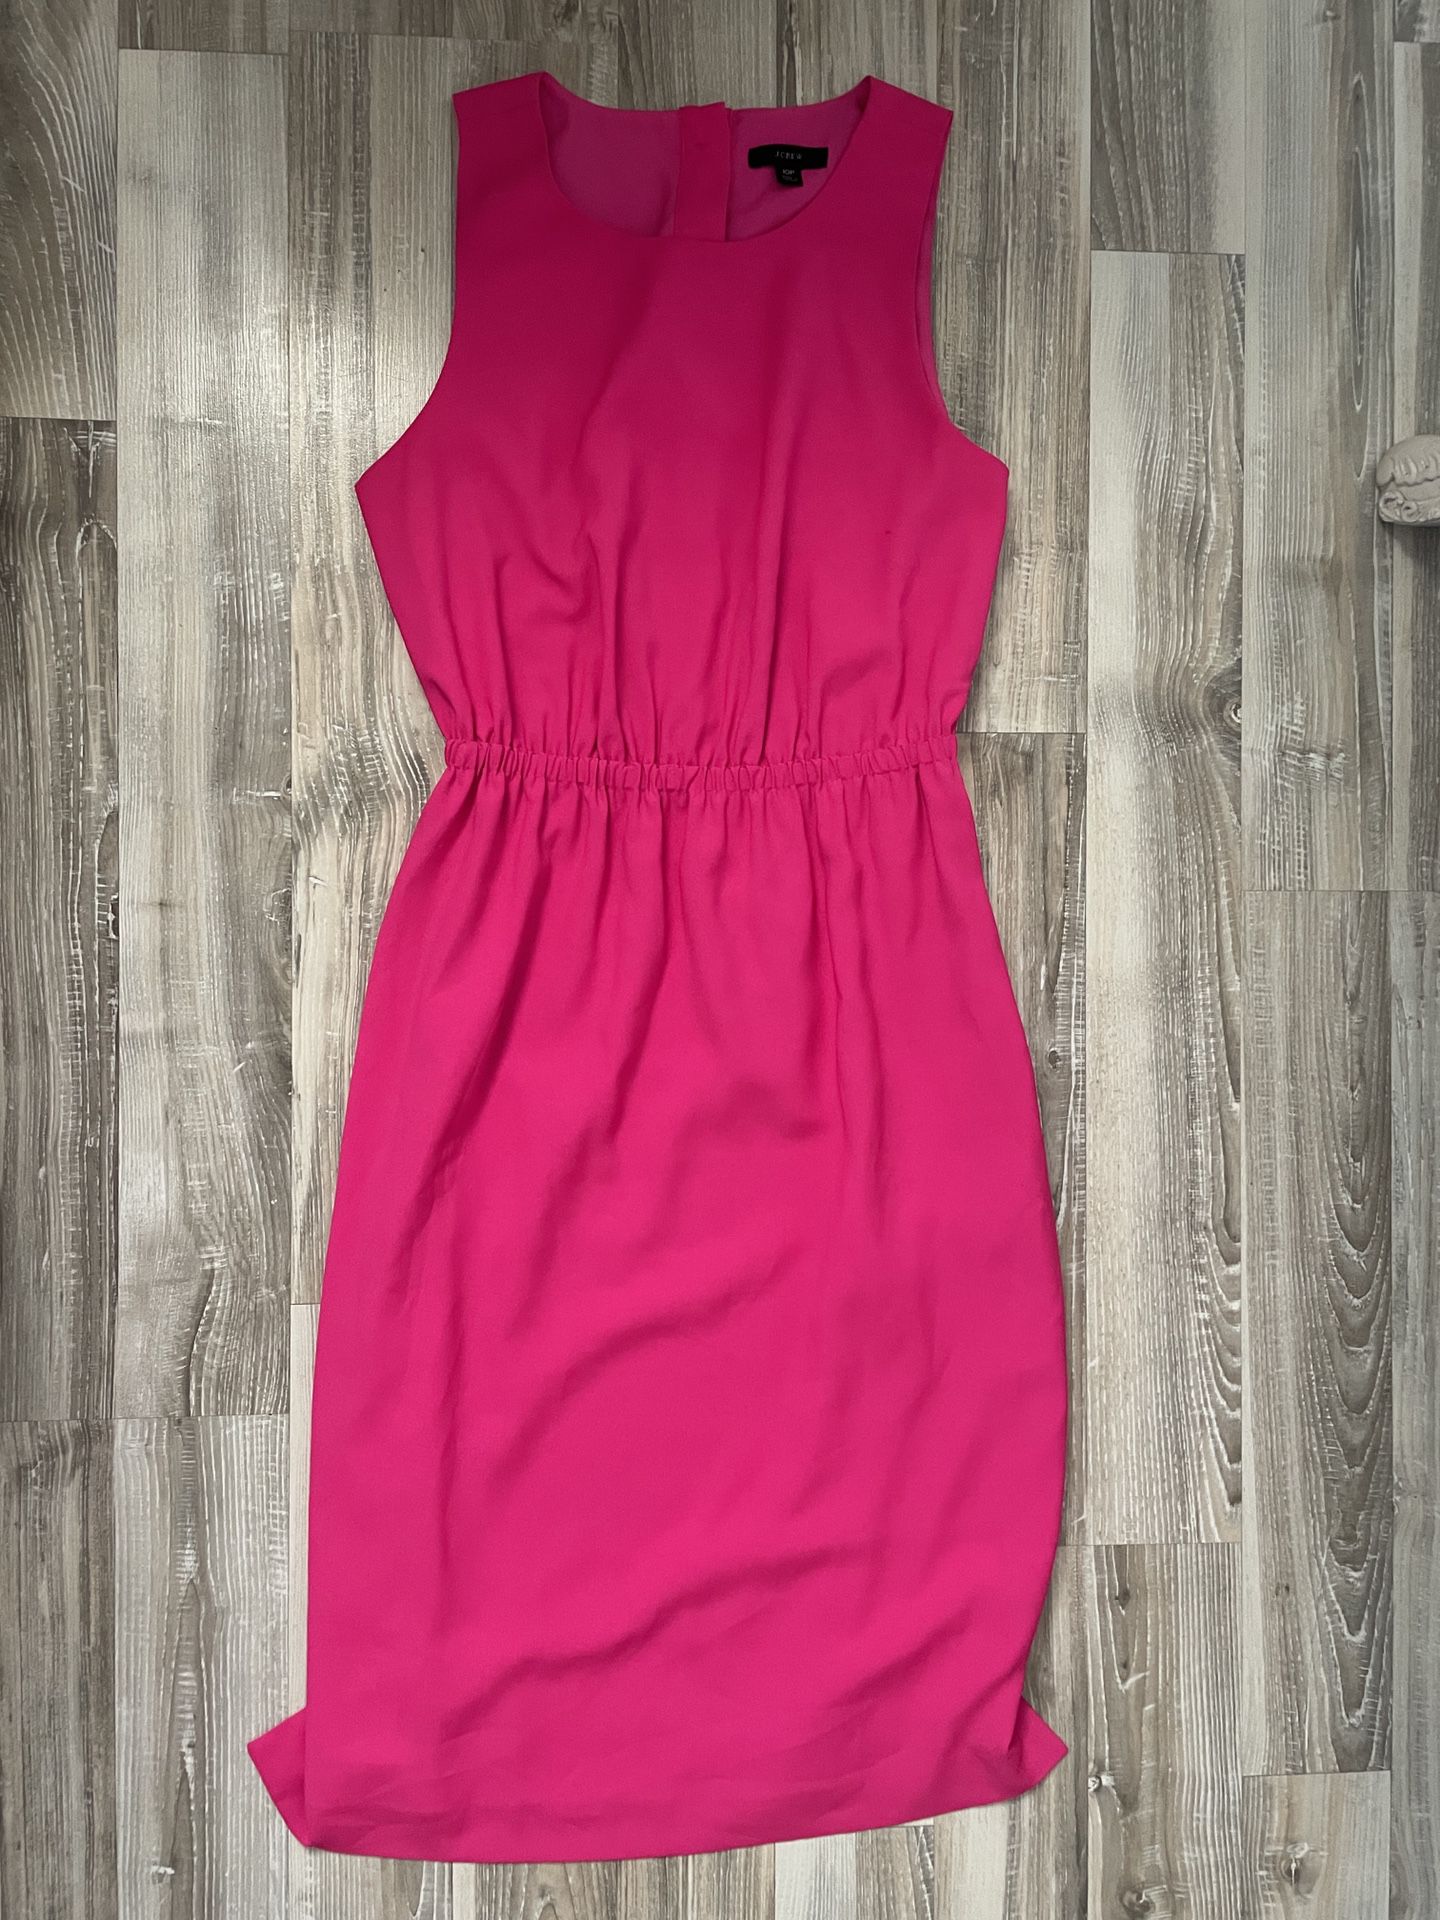 J. Crew Hot Pink Sleeveless Midi Dress Elastic Band Solid  Slits Buttons Size 10